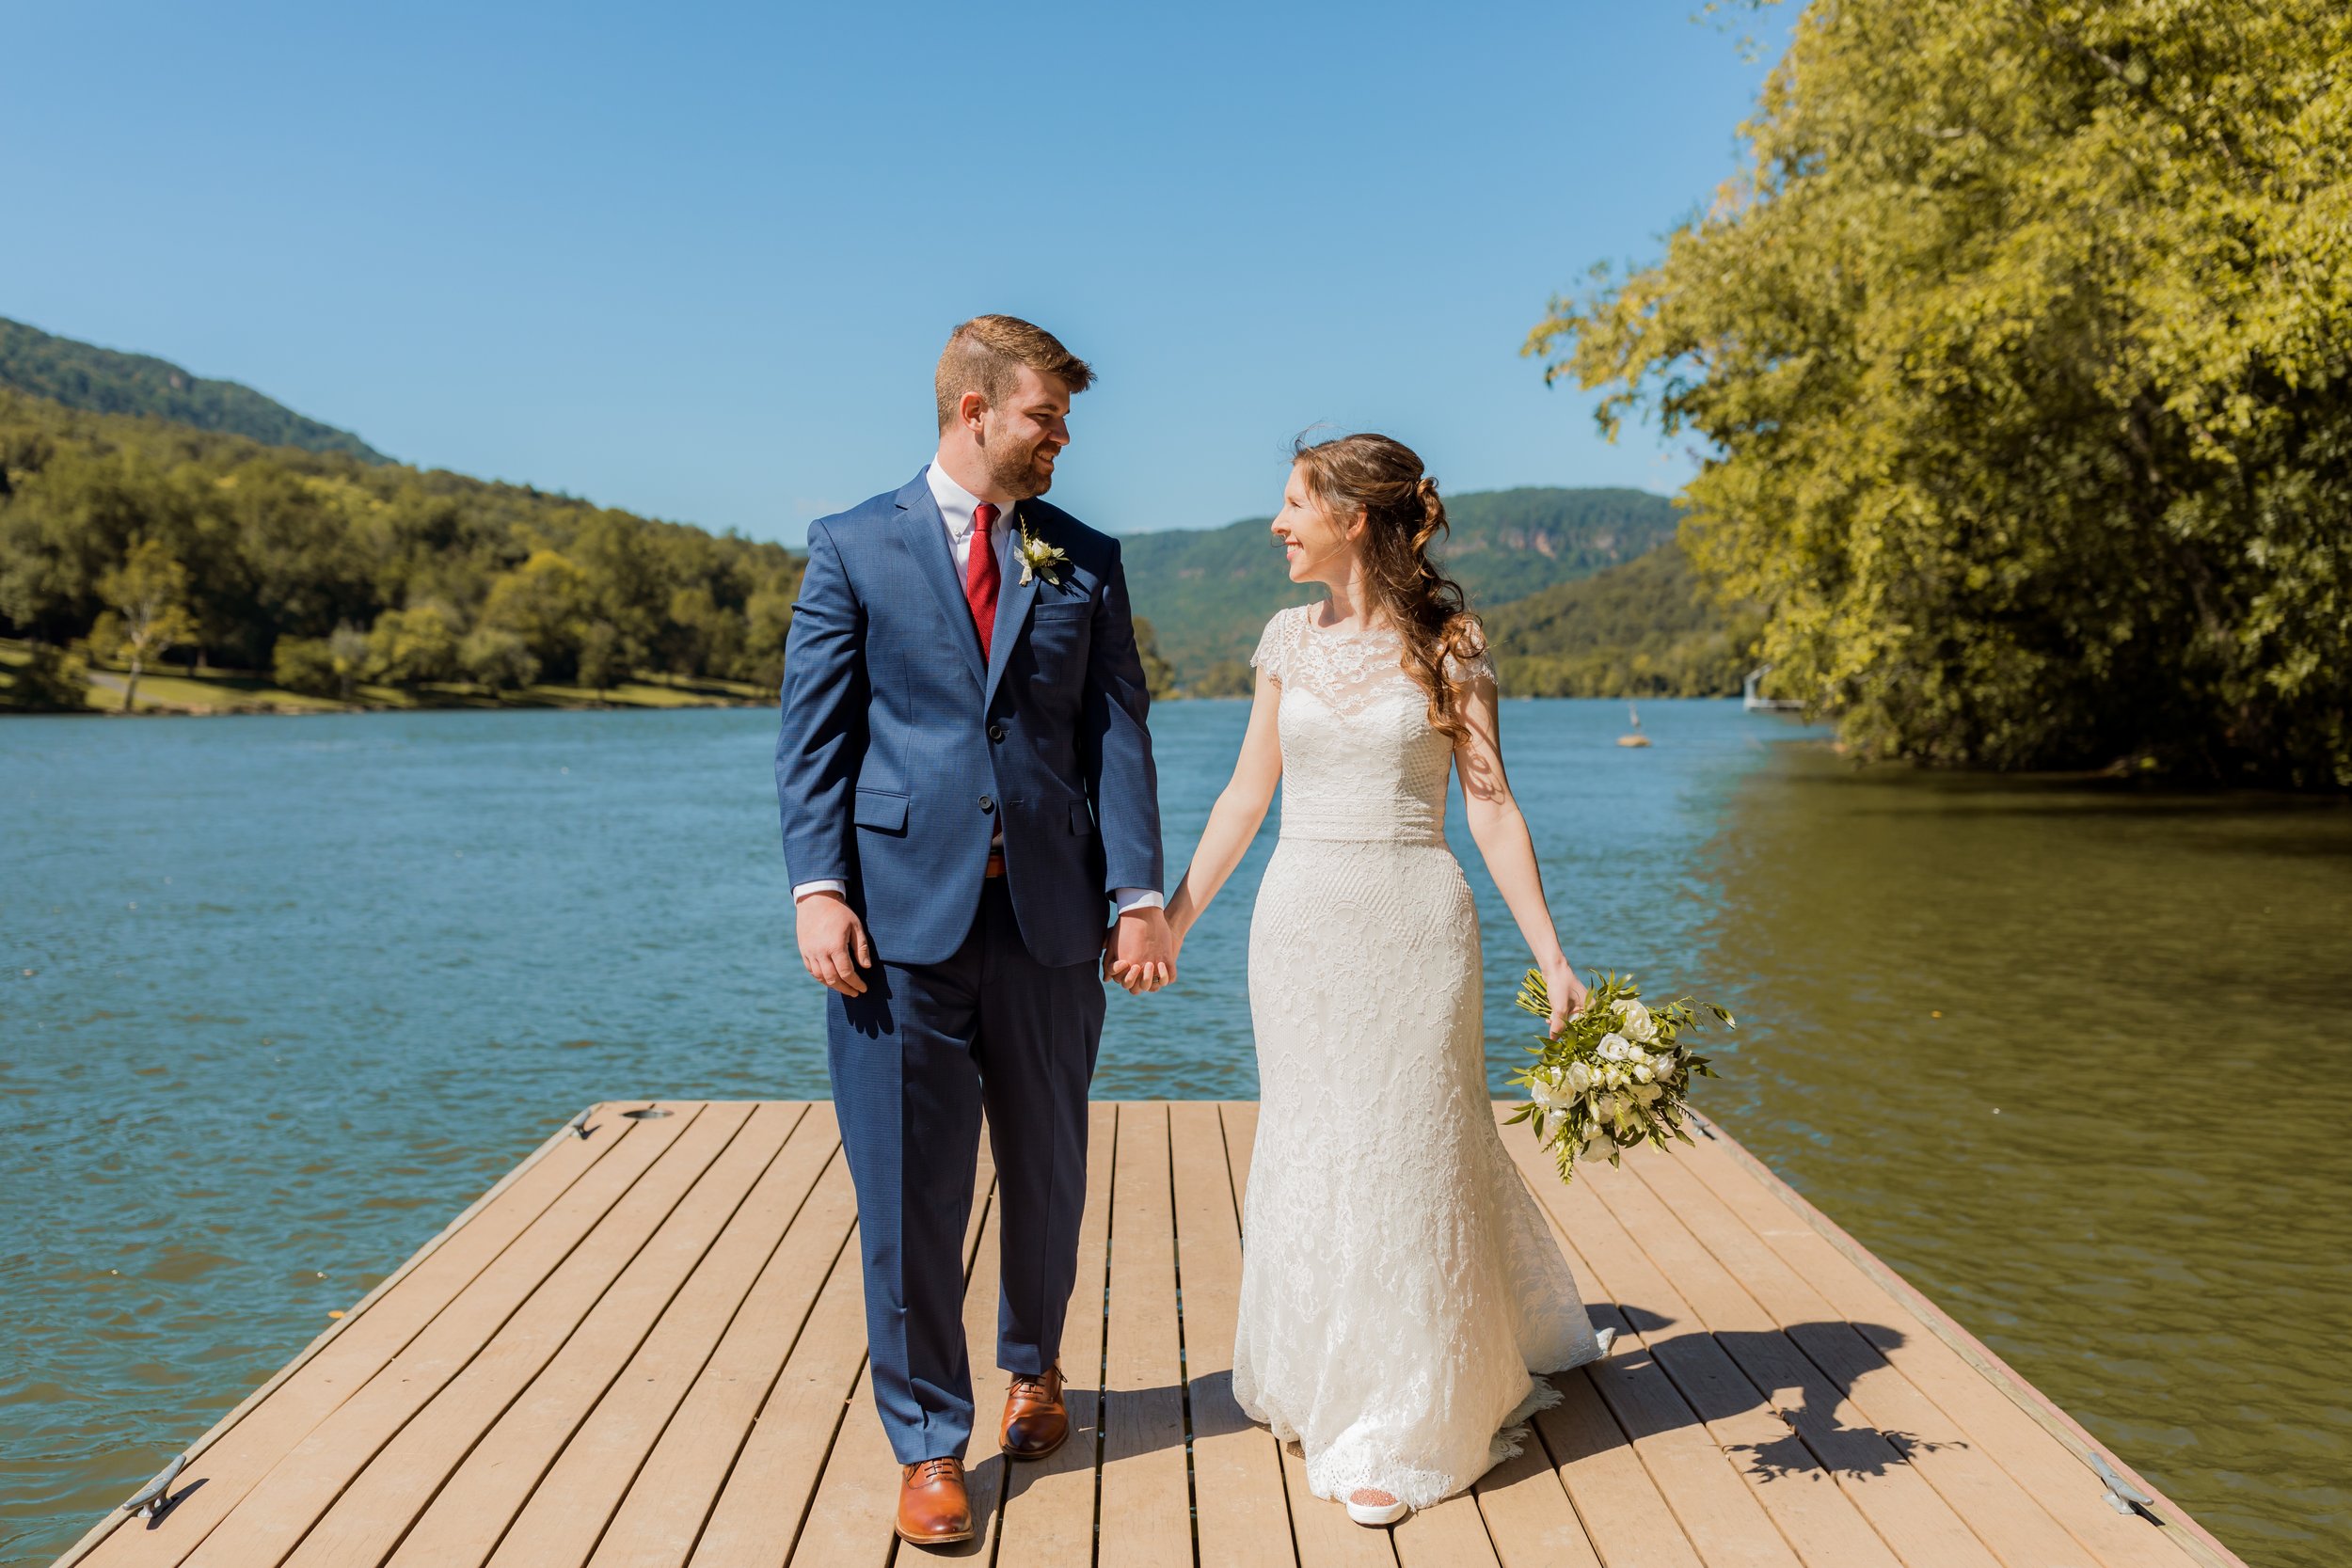 Elopement_Snoopers_Rock_Chattanooga_TN_Emily_Lester_Photography-191.jpg